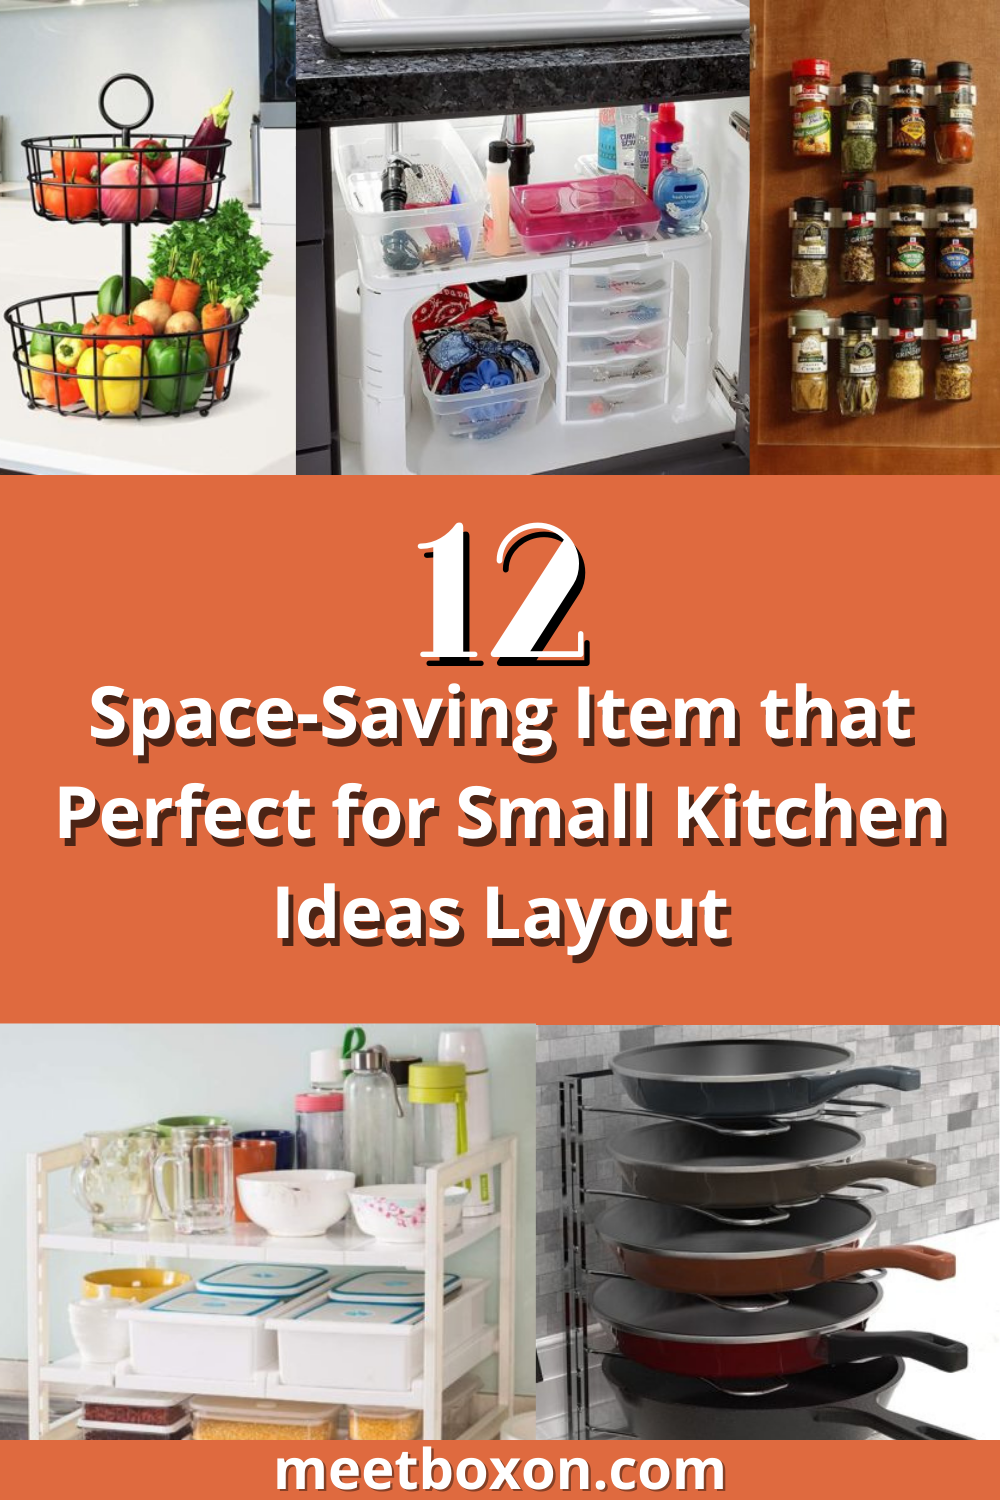 12 Space-Saving Item that Perfect for Small Kitchen Ideas Layout